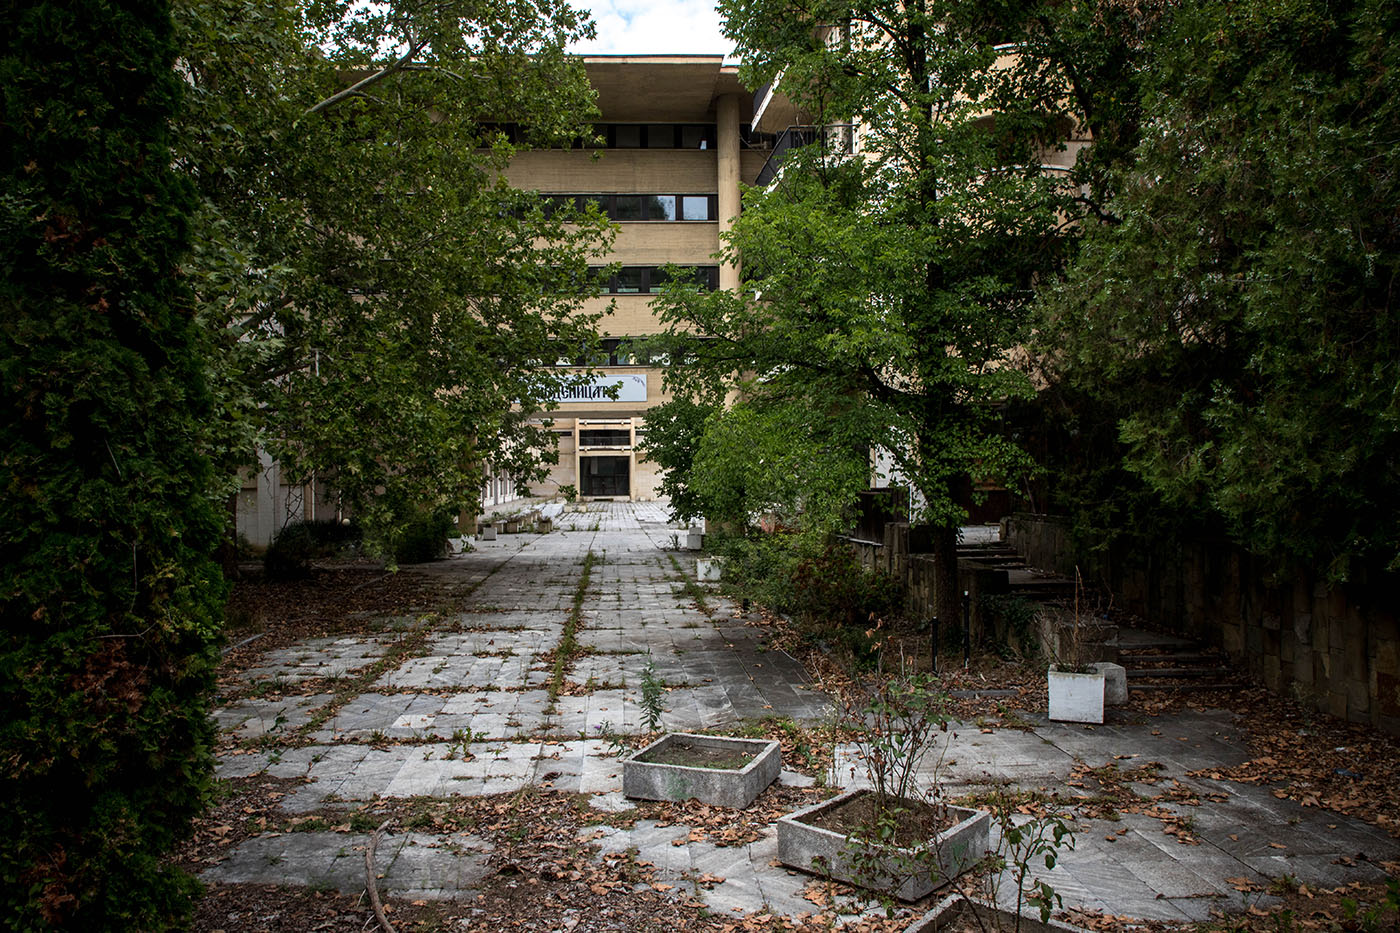 The state of the courtyard a year after closure. Interhotel Veliko Turnovo, September 2022.